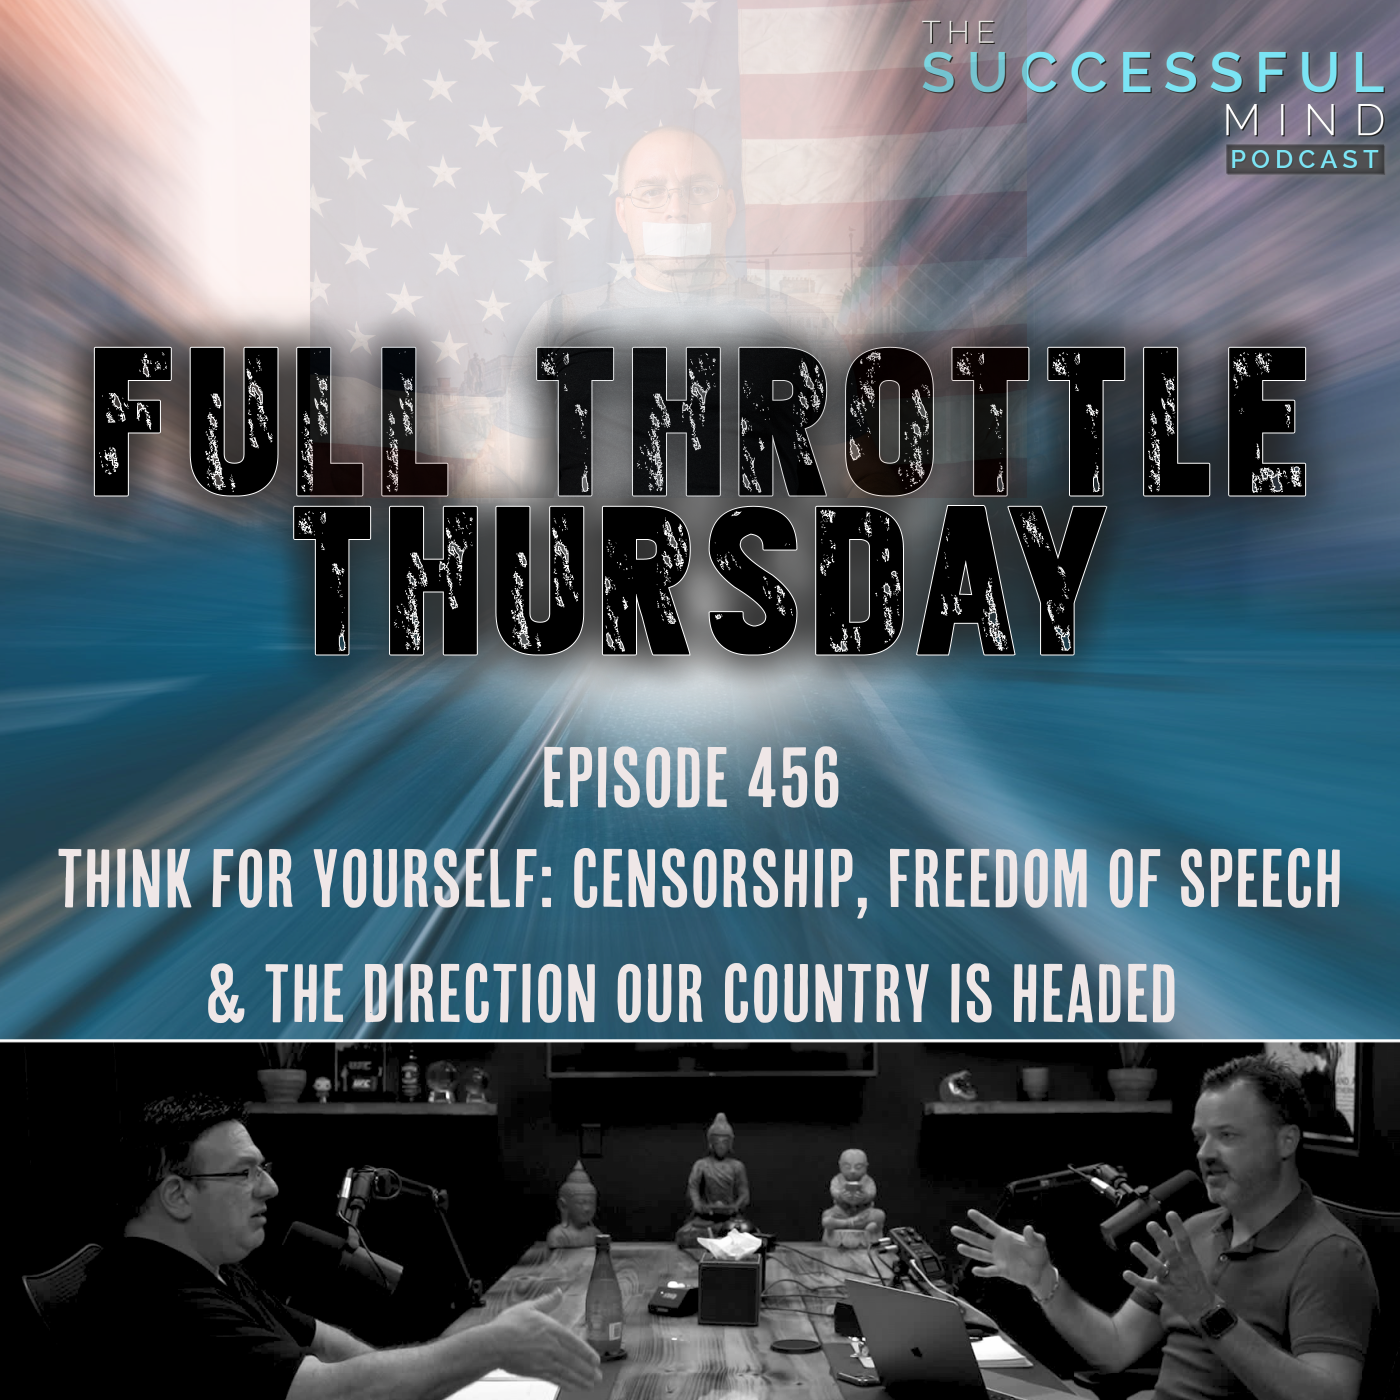 The Successful Mind Podcast – Episode 456 – Full Throttle Thursday – Think For Yourself: Censorship, Freedom of Speech, & the Direction Our Country is Headed